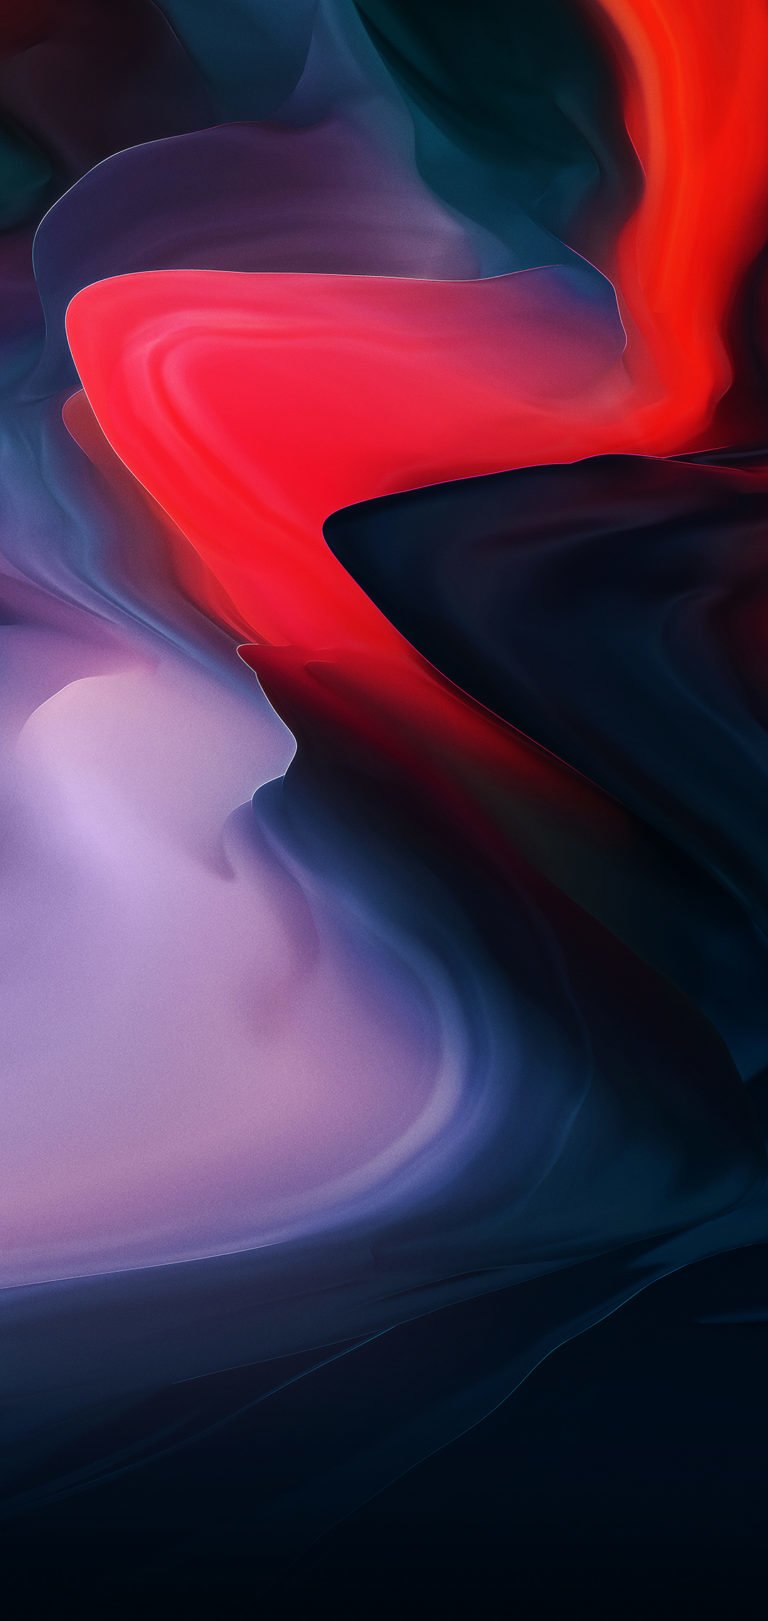 OnePlus 6 Wallpapers Available For Download Here